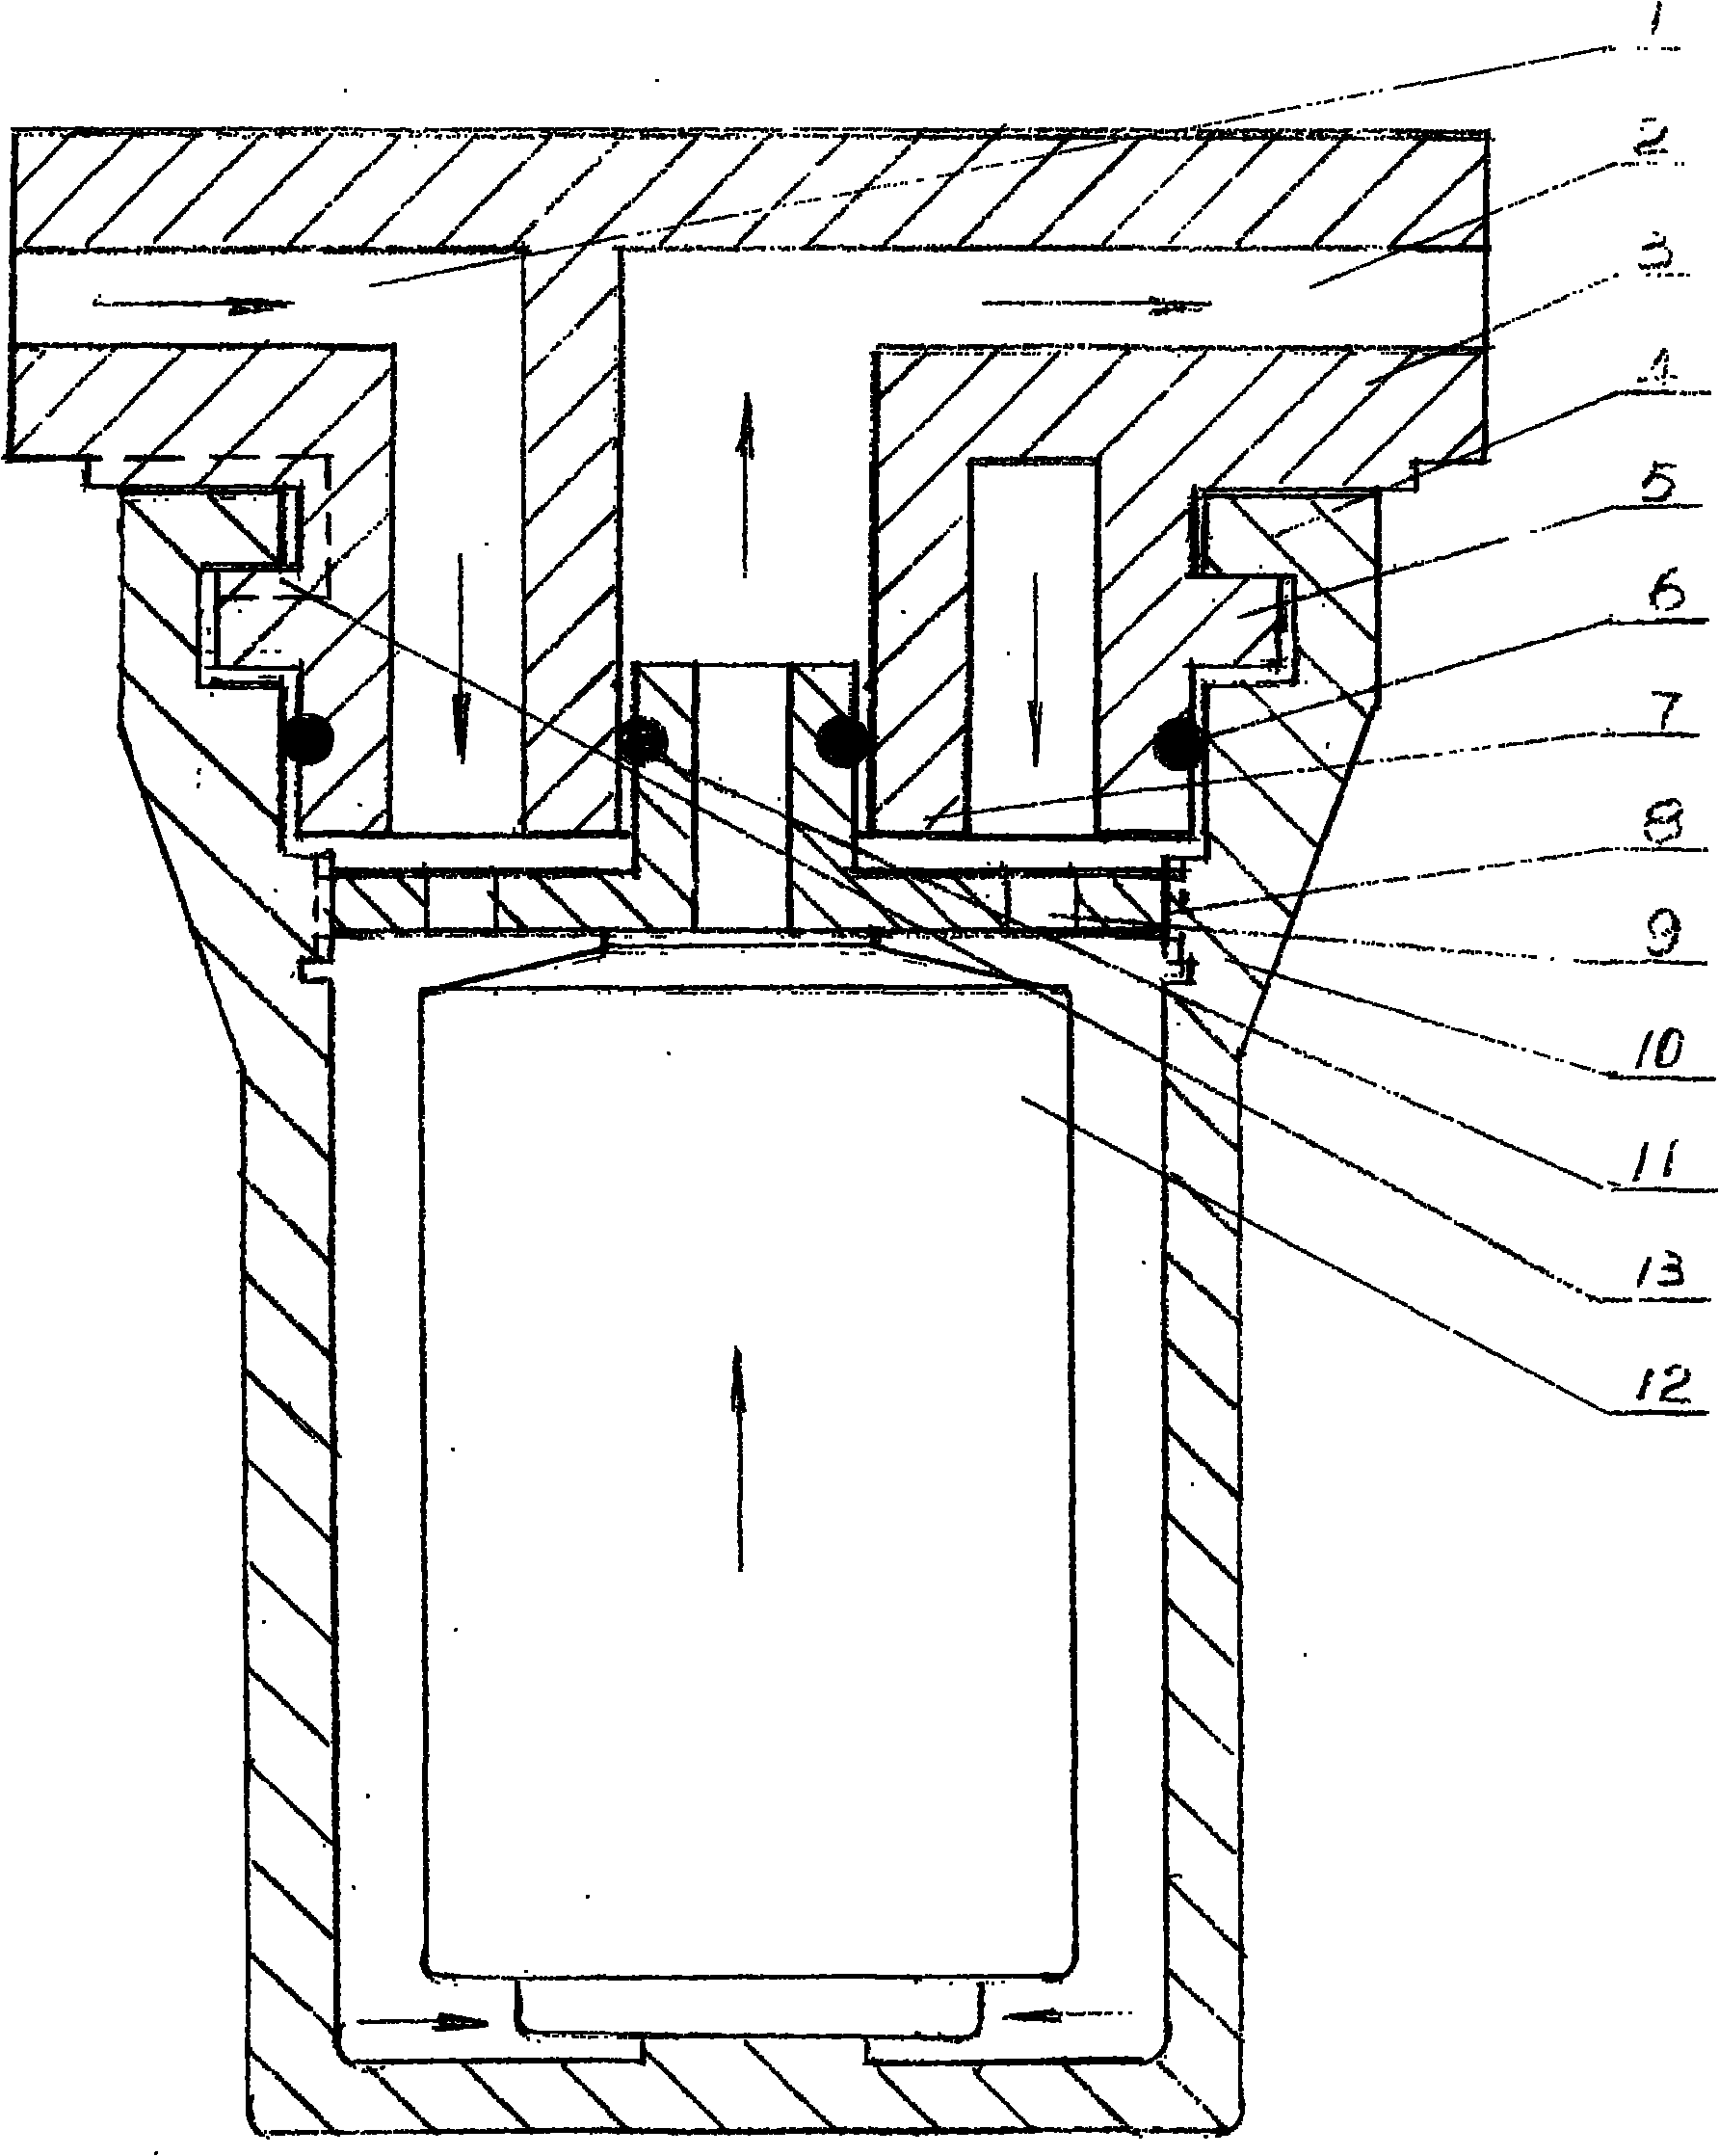 Filtering shell of water purifier and connecting method with base